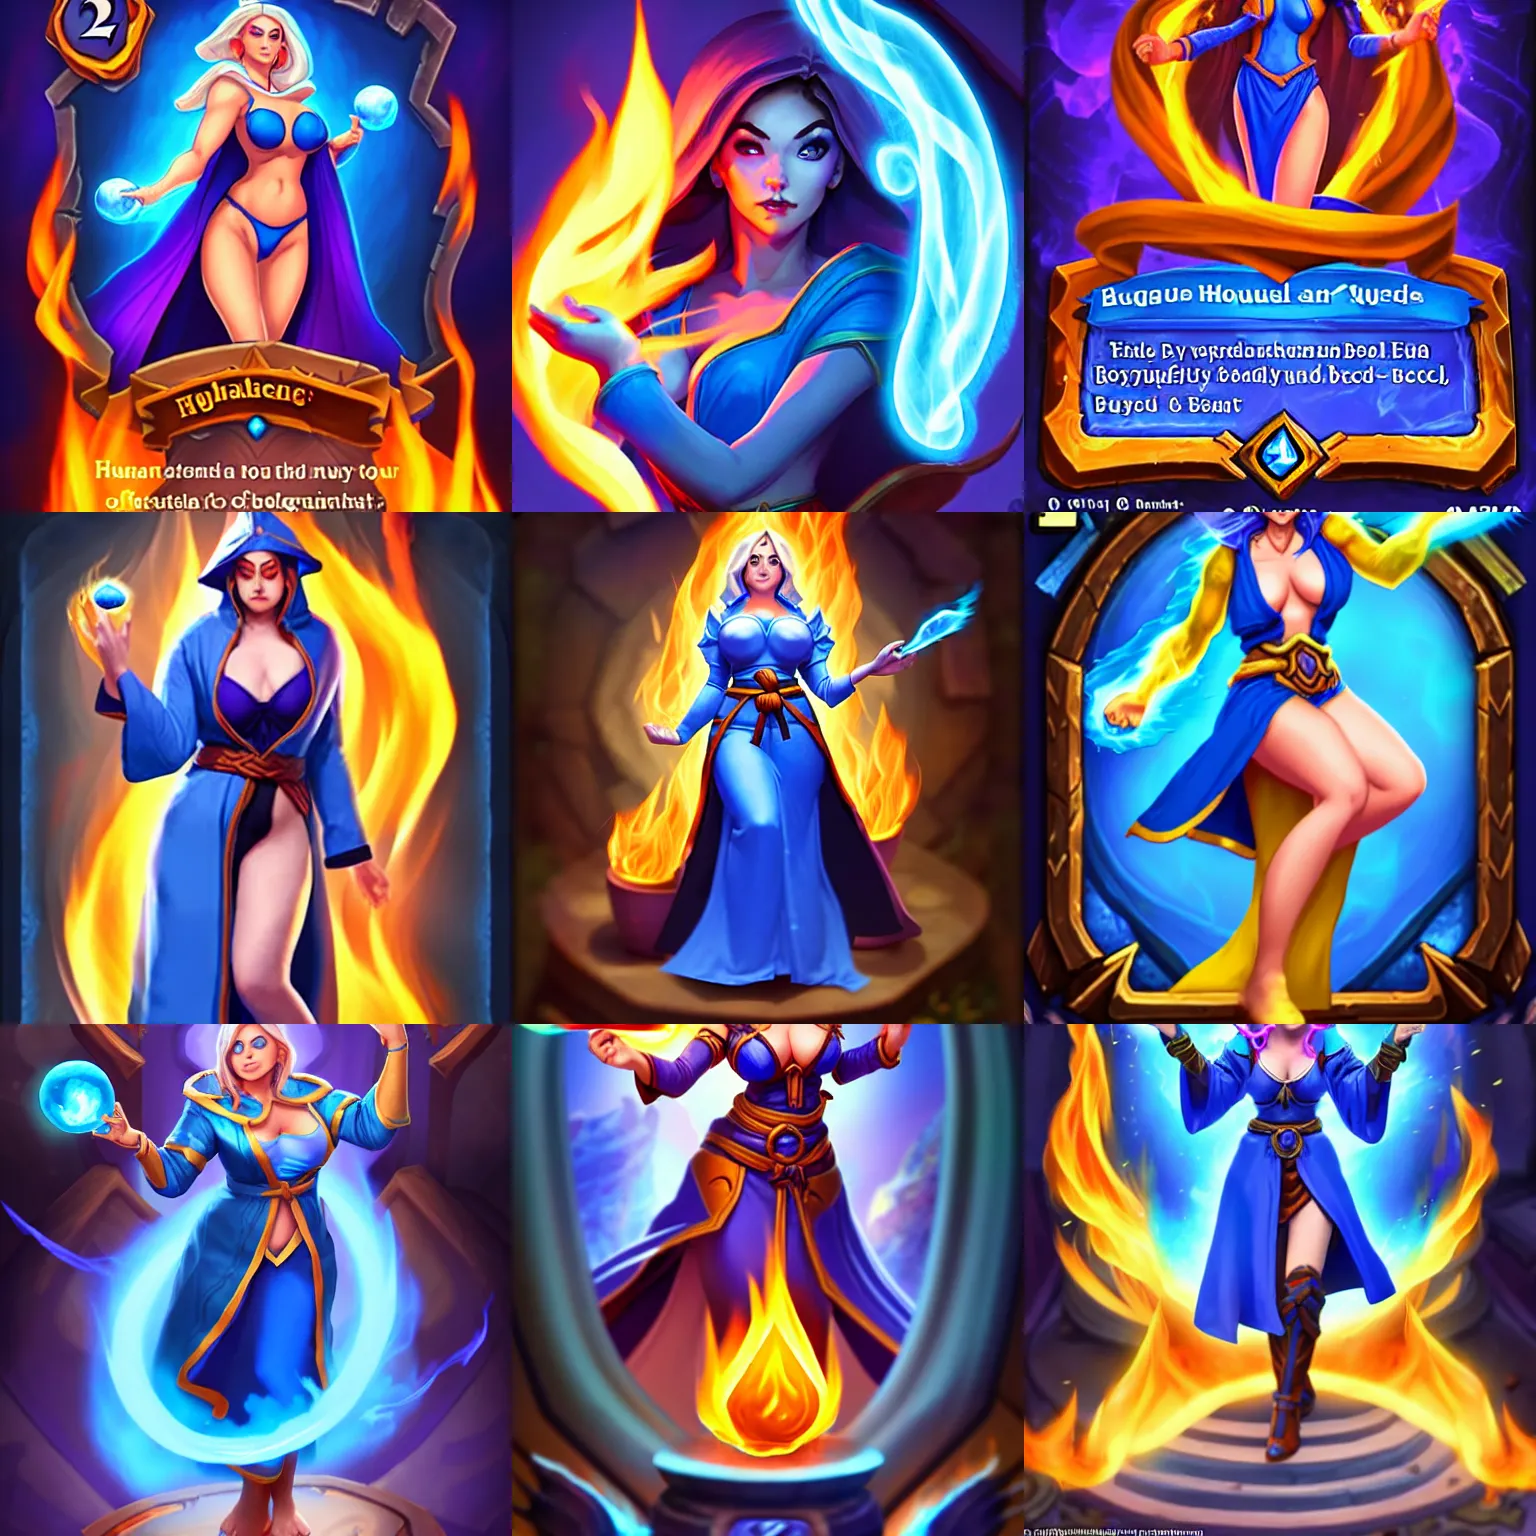 Prompt: IMPORTANT : a female mage with a blue robe casting a fire ball ; Body type : voluptious hourglass body ; Head : Beautiful face ; IMPORTANT : Hearthstone official splash art, award winning, trending